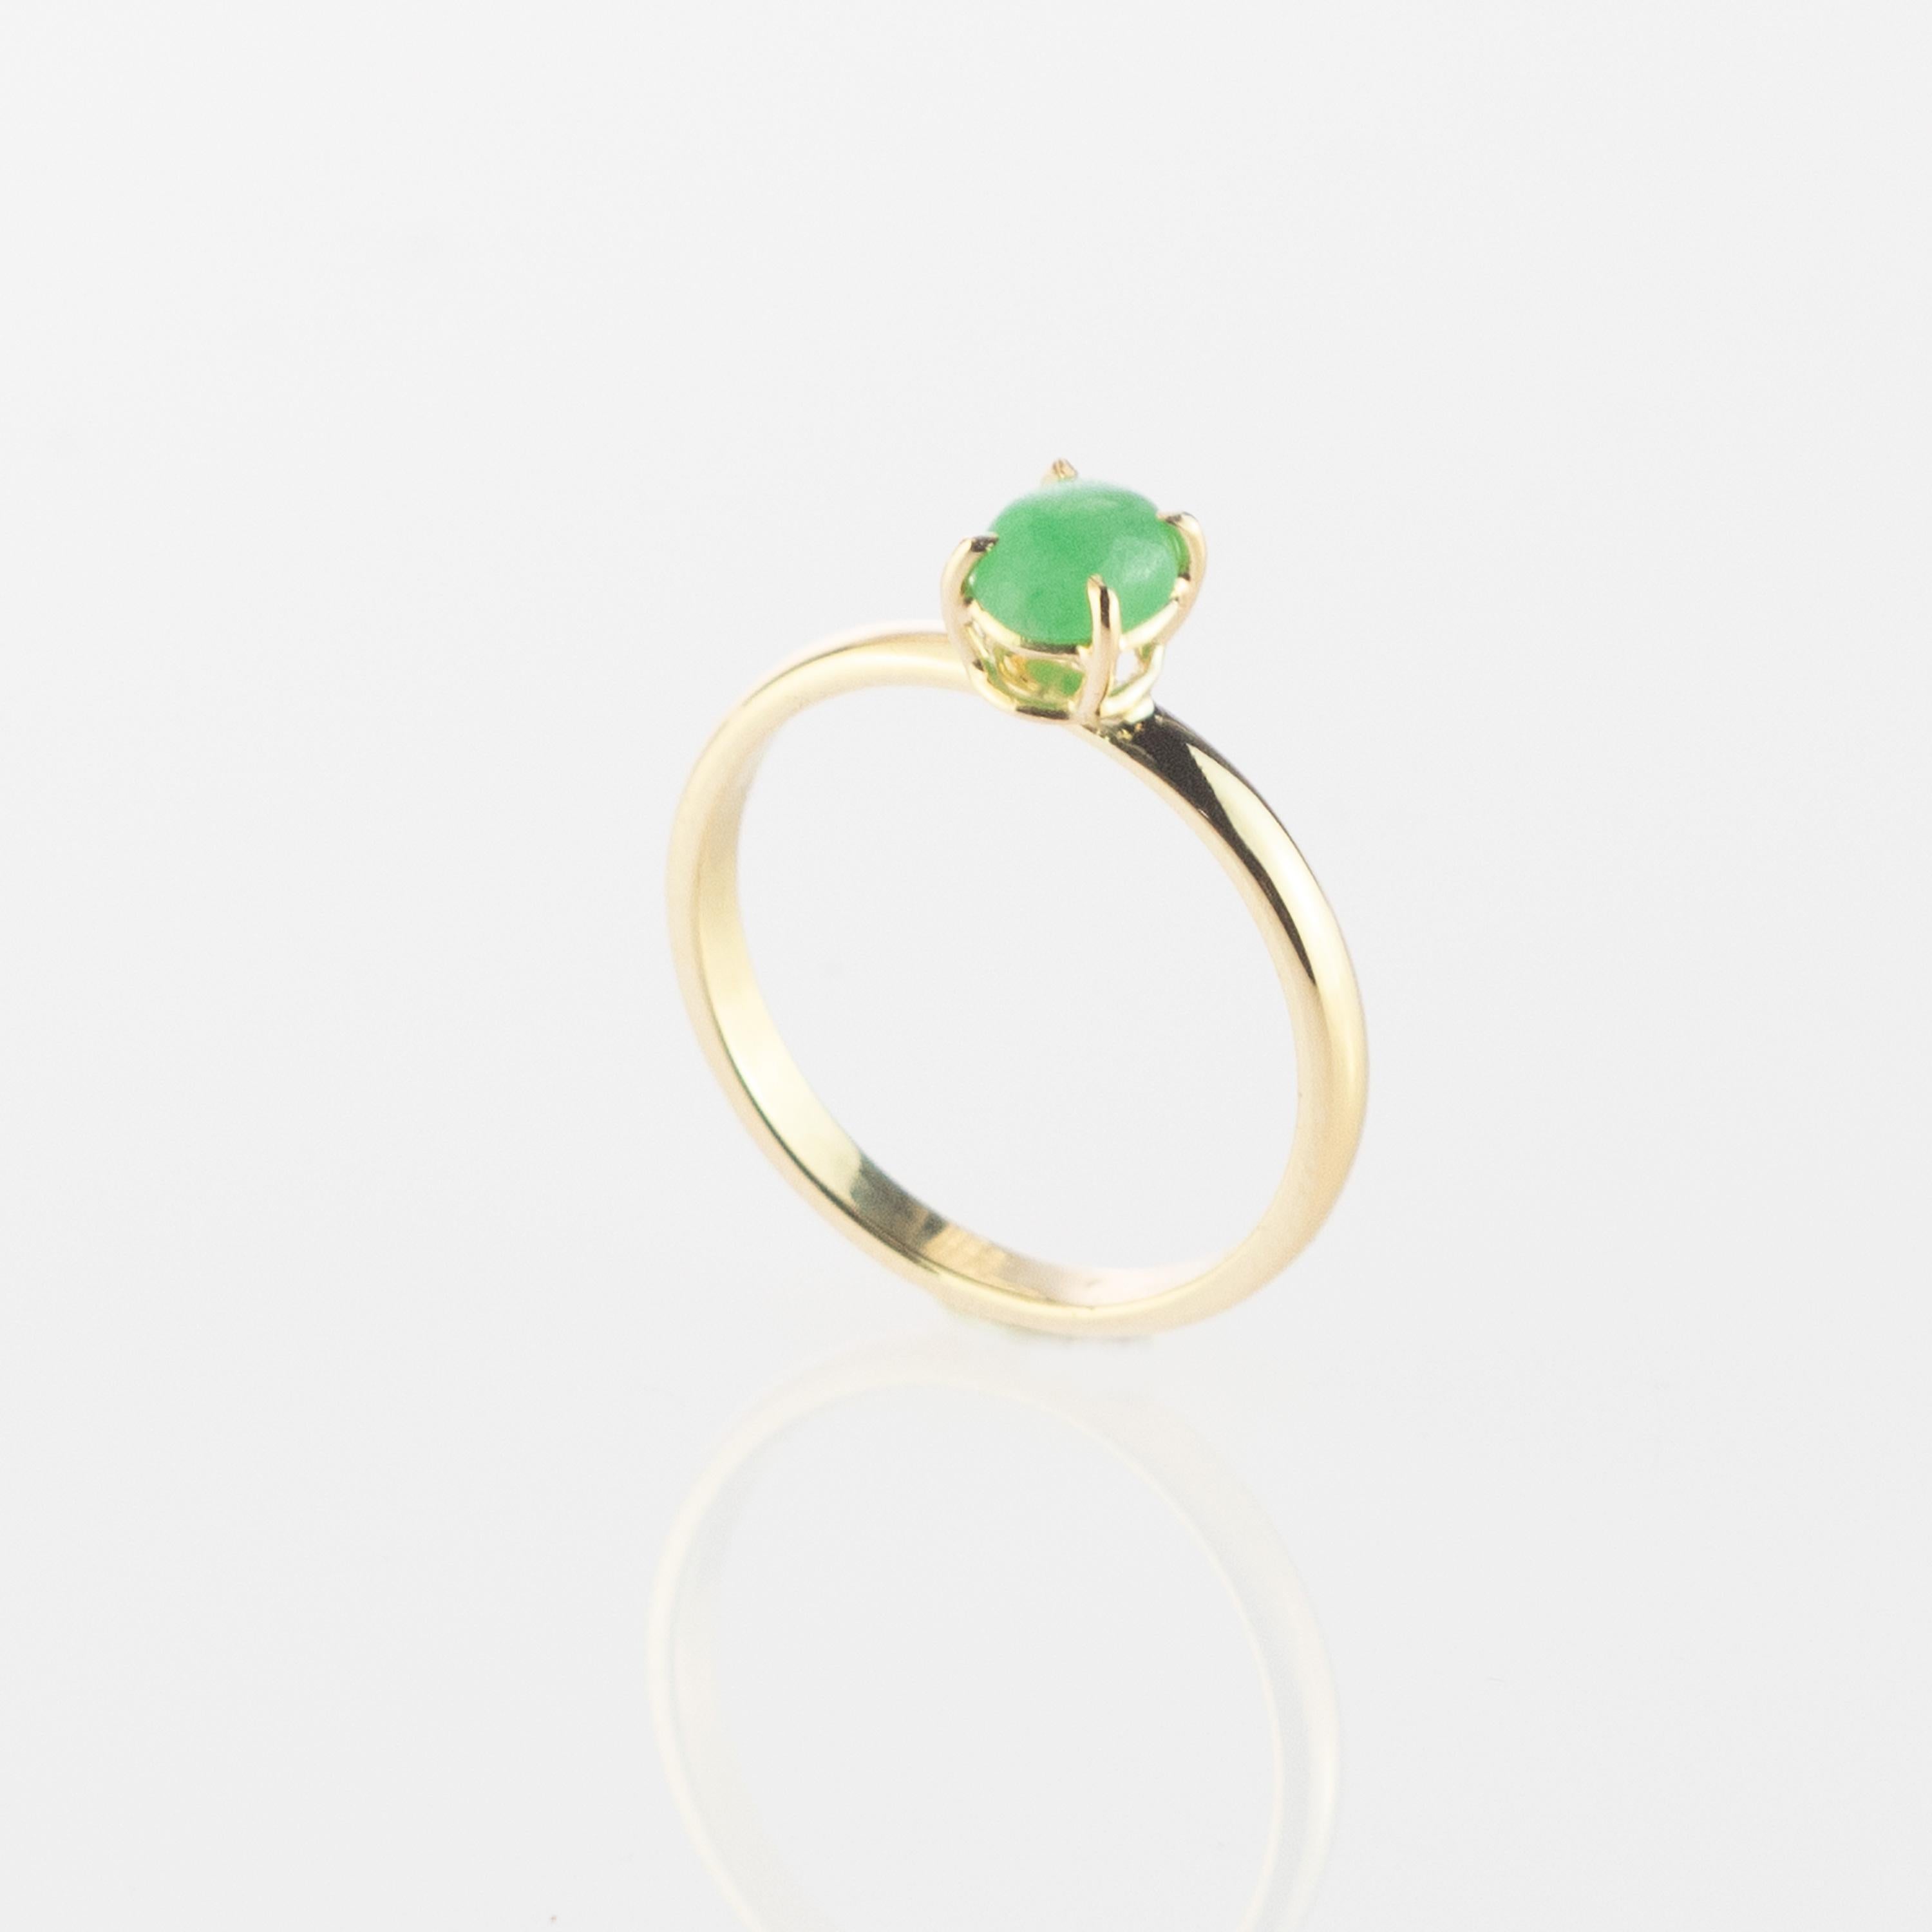 Women's Intini Jewels 0.5 Carat Green Jade 9 Karat Yellow Gold Cocktail Chic Oval Ring For Sale